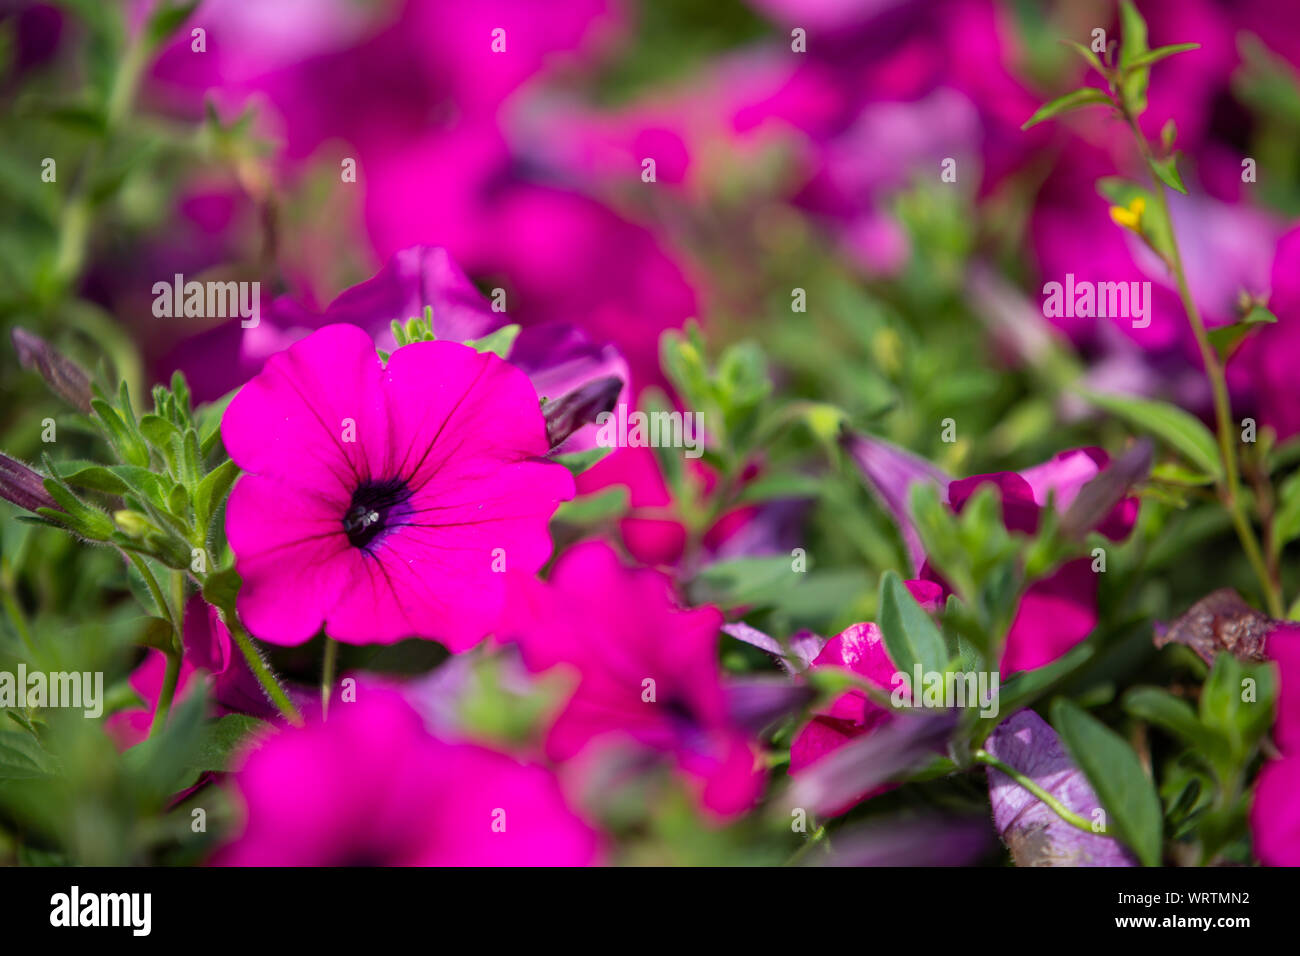 Petunia (Petunia hybrida) flowers in the garden, Pink colour,  Close up & Macro shot, Selective focus, Abstract pattern background Stock Photo